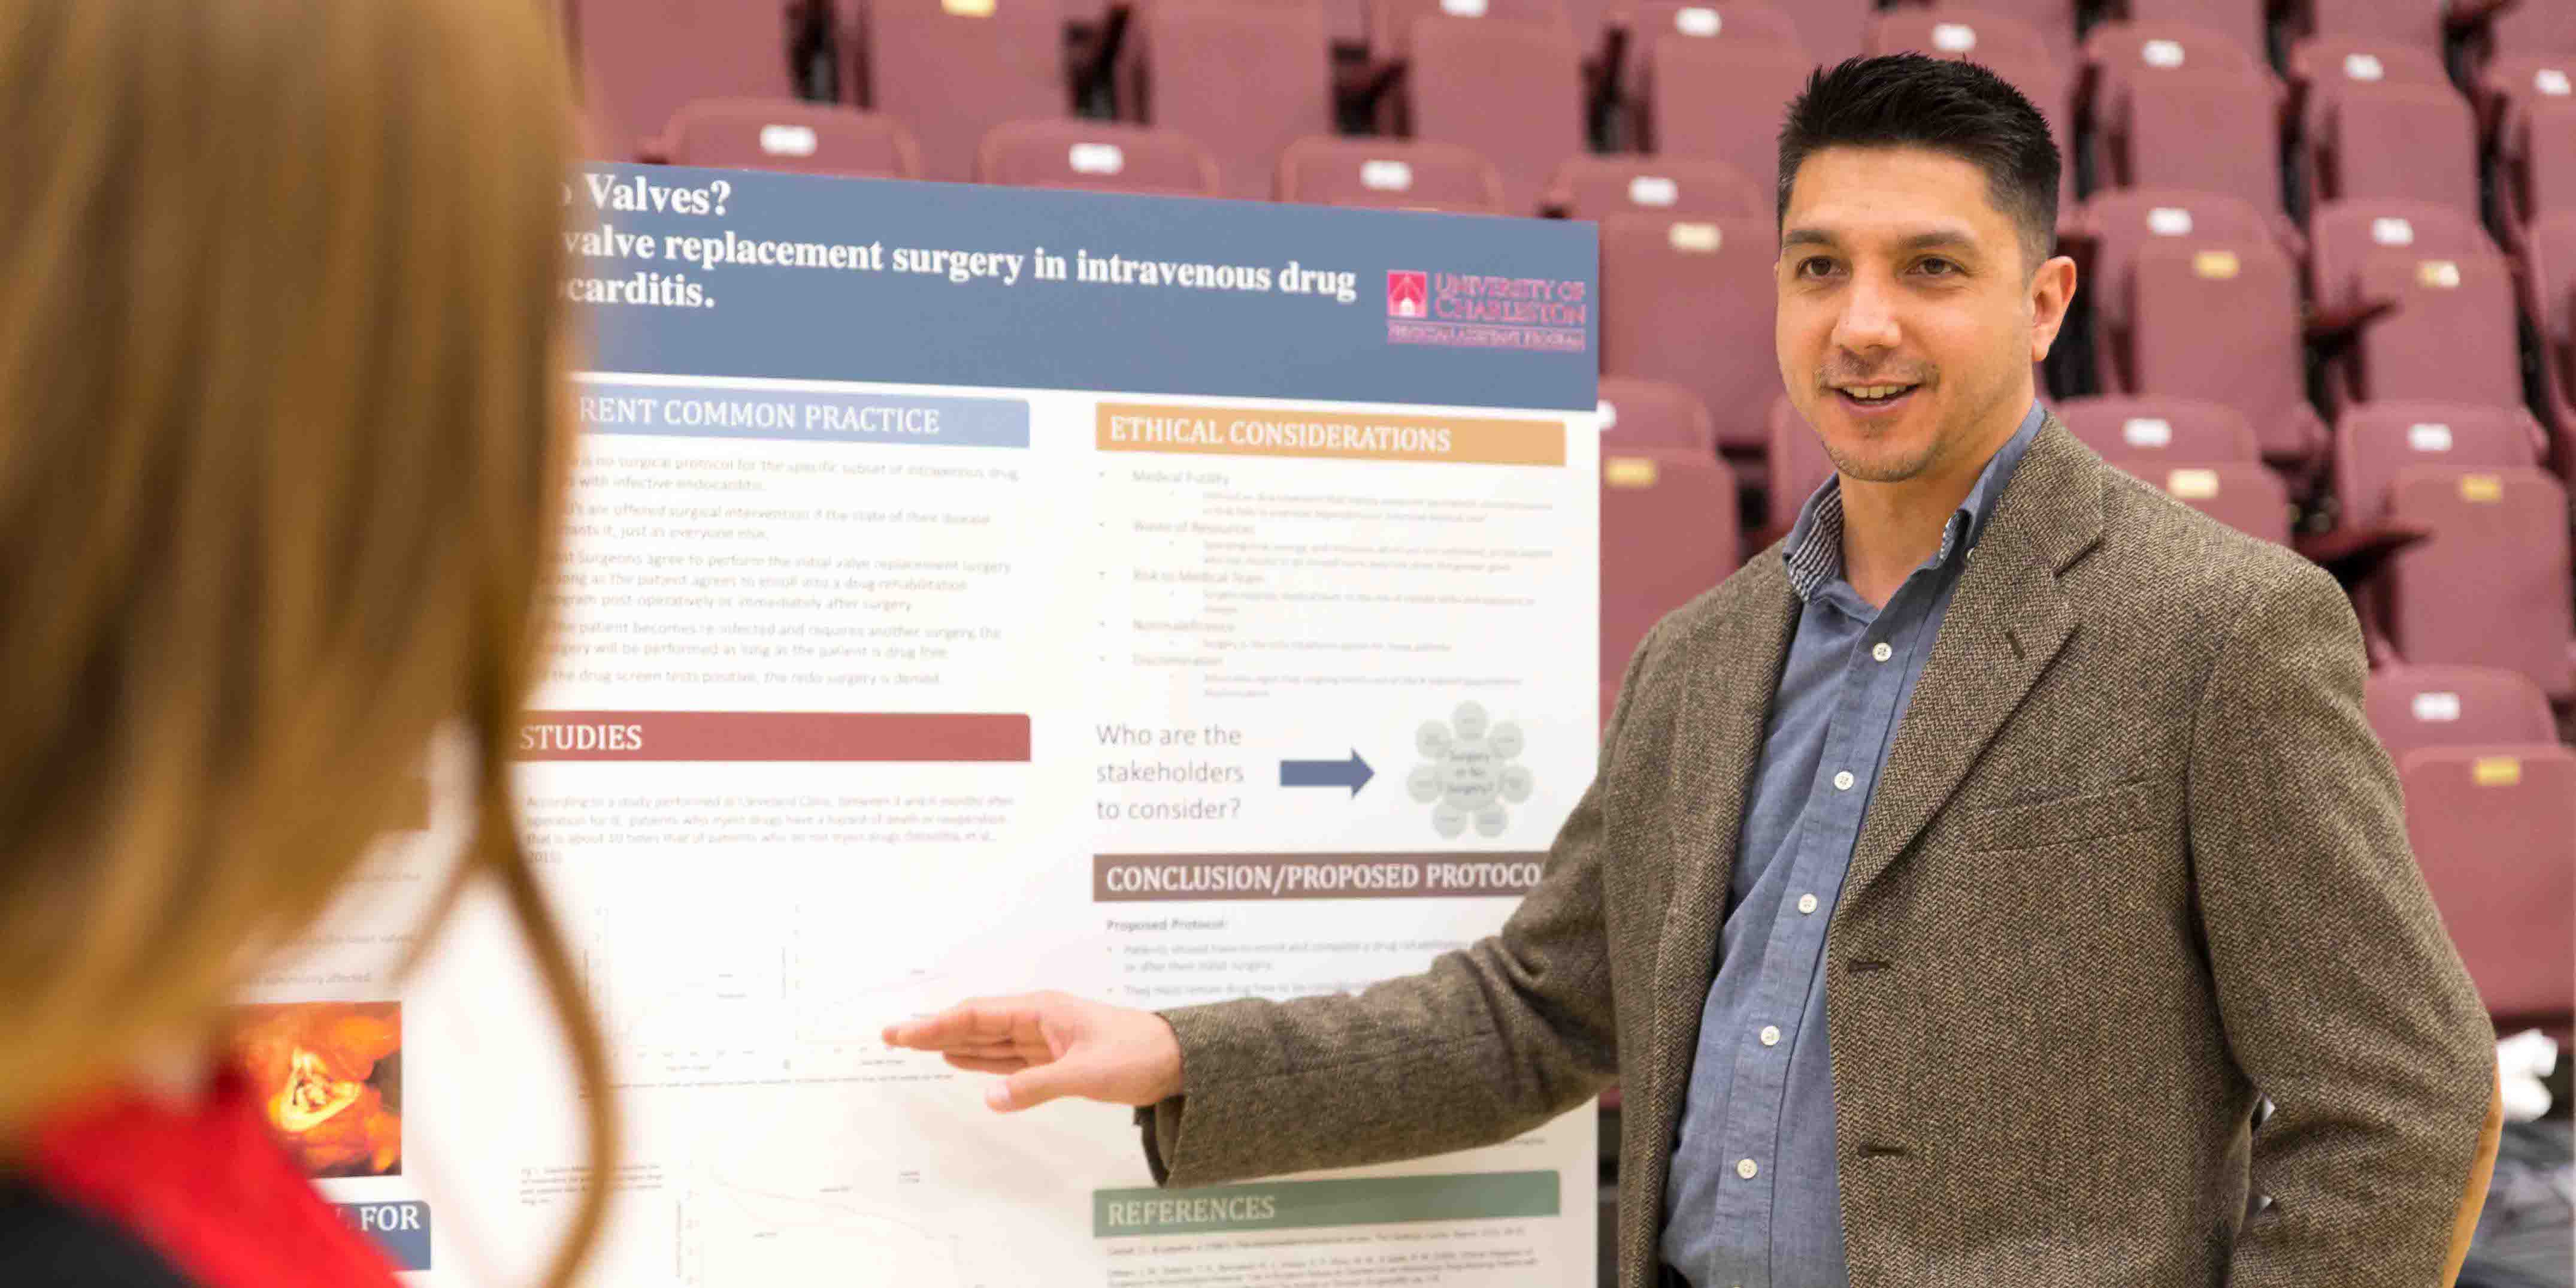 Male student in professional attire pointing to and discussing his research poster